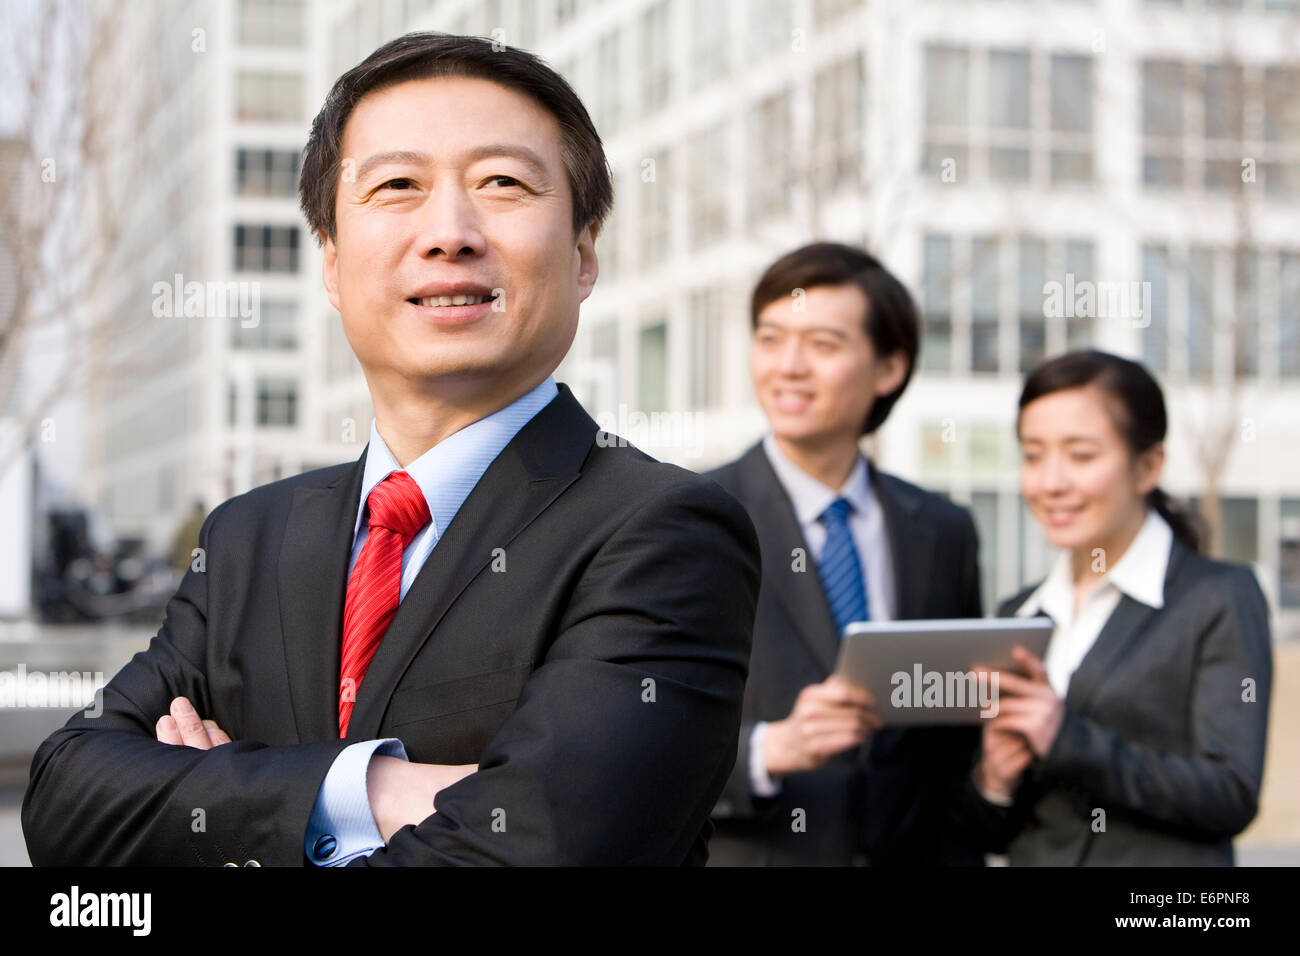 Older business man standing in front of colleagues Stock Photo